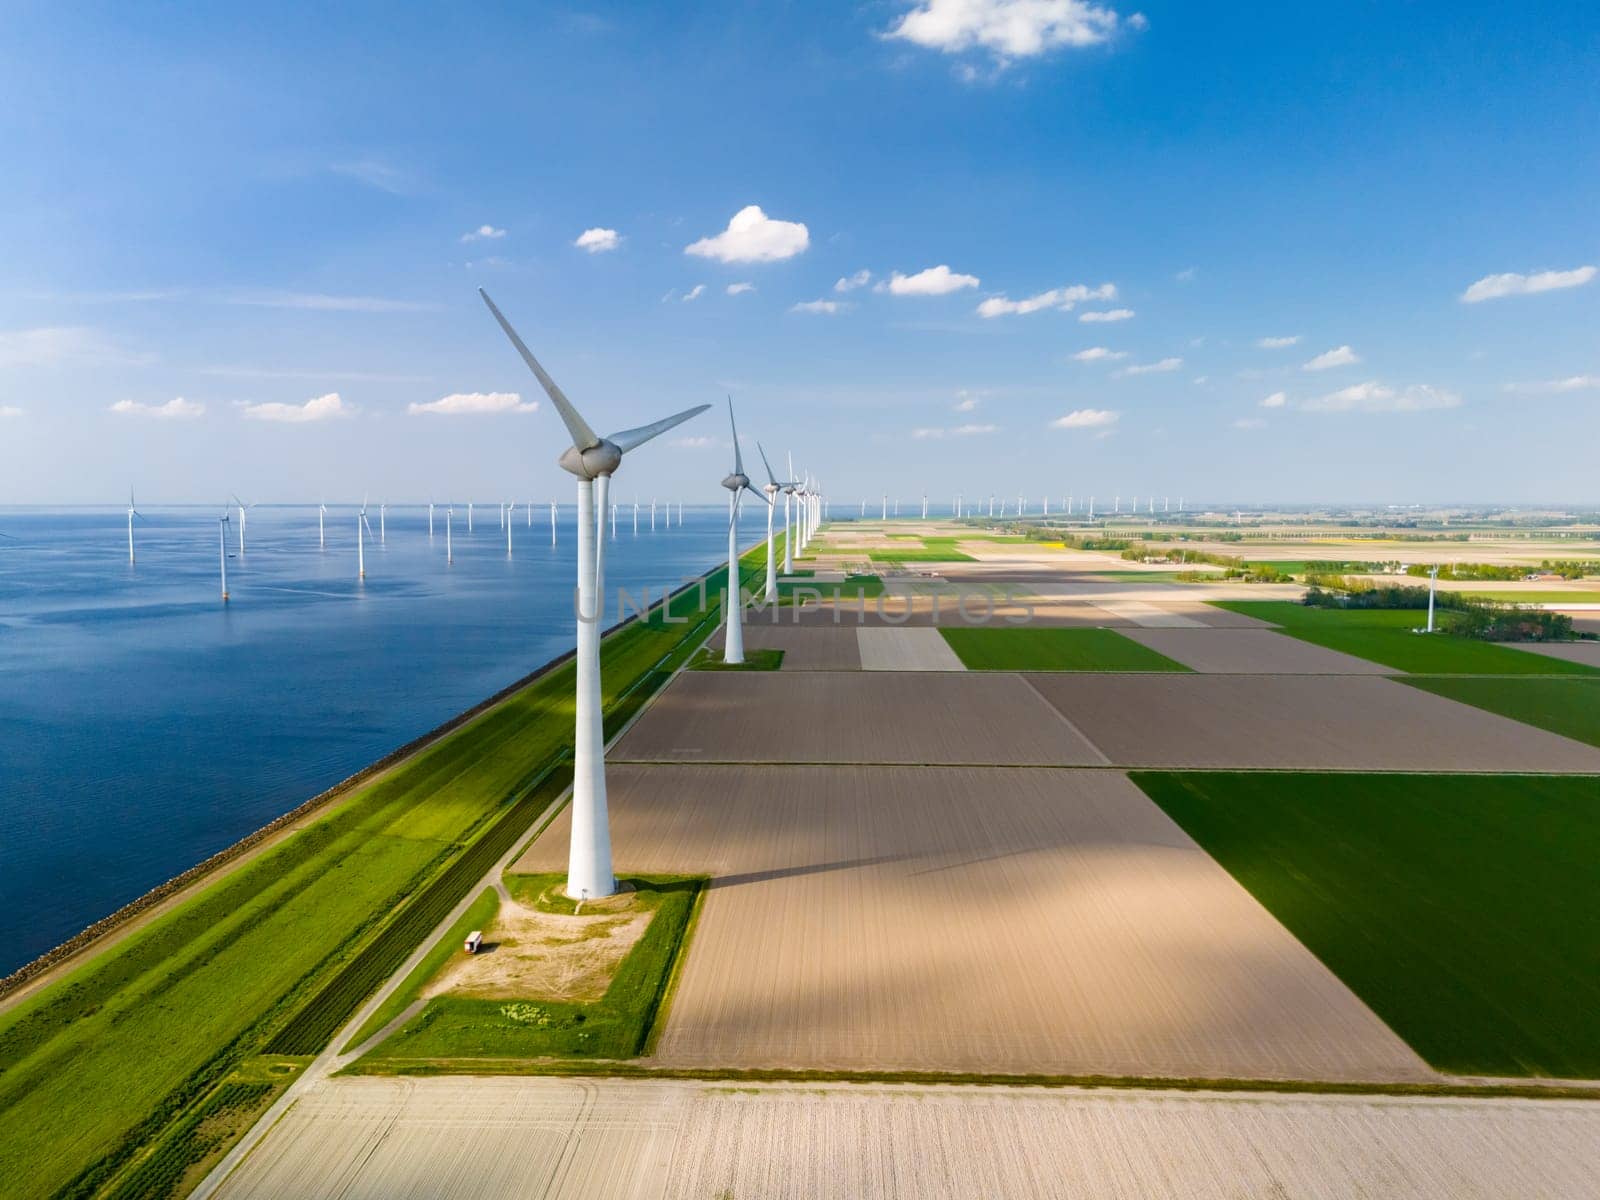 A breathtaking aerial view captures a wind farm in the Netherlands Flevoland region, with rows of majestic windmill turbines gracefully turning near the ocean.